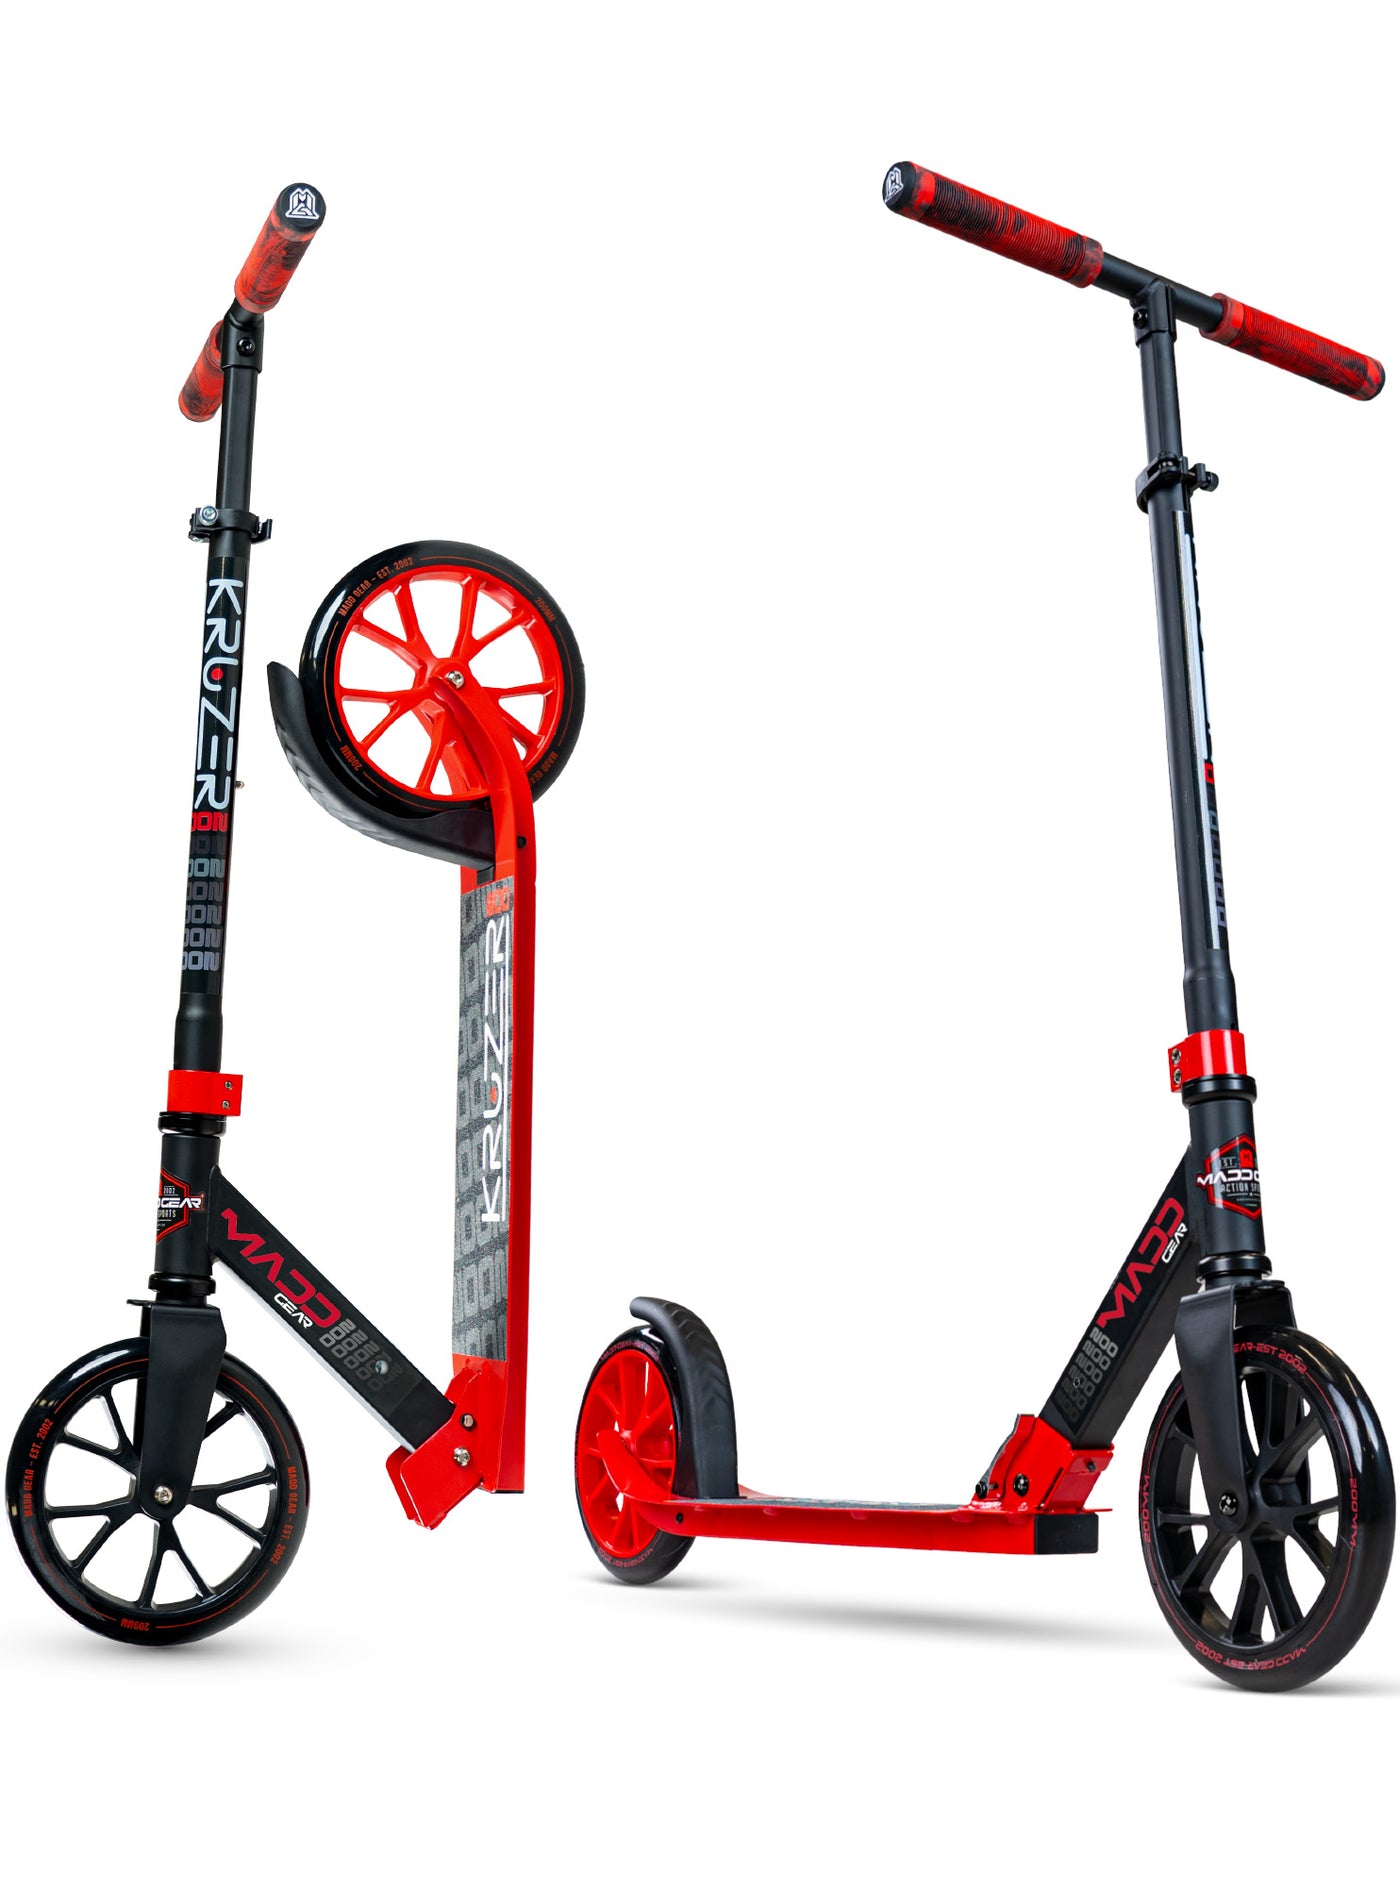 Kruzer 200 Folding Scooter - Red